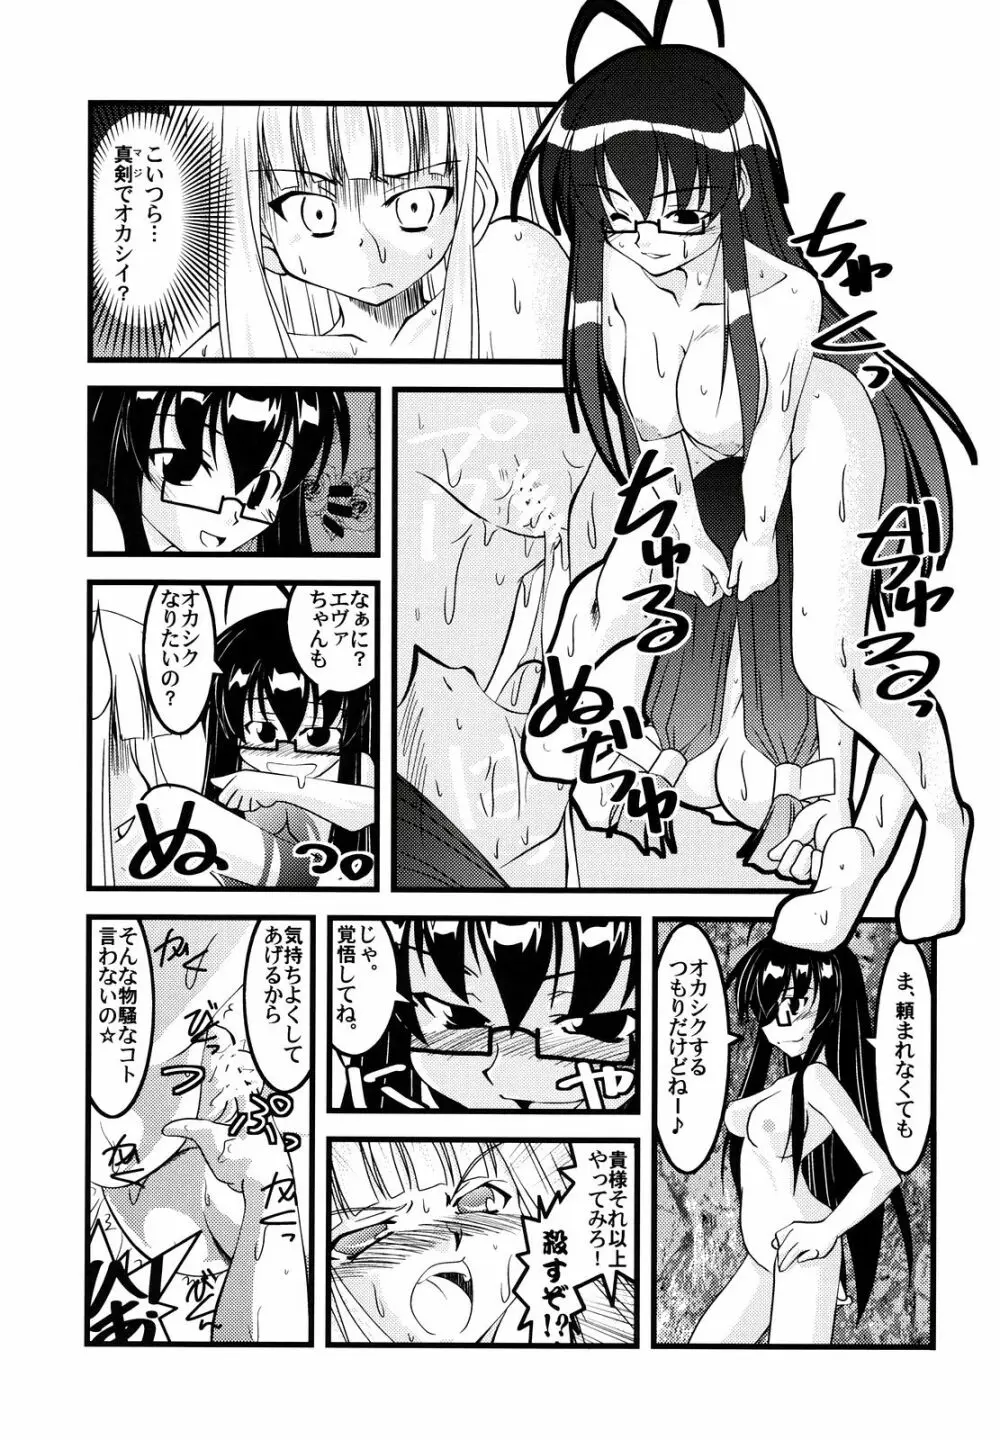 Lovelys in the School with Dream 5 Page.18